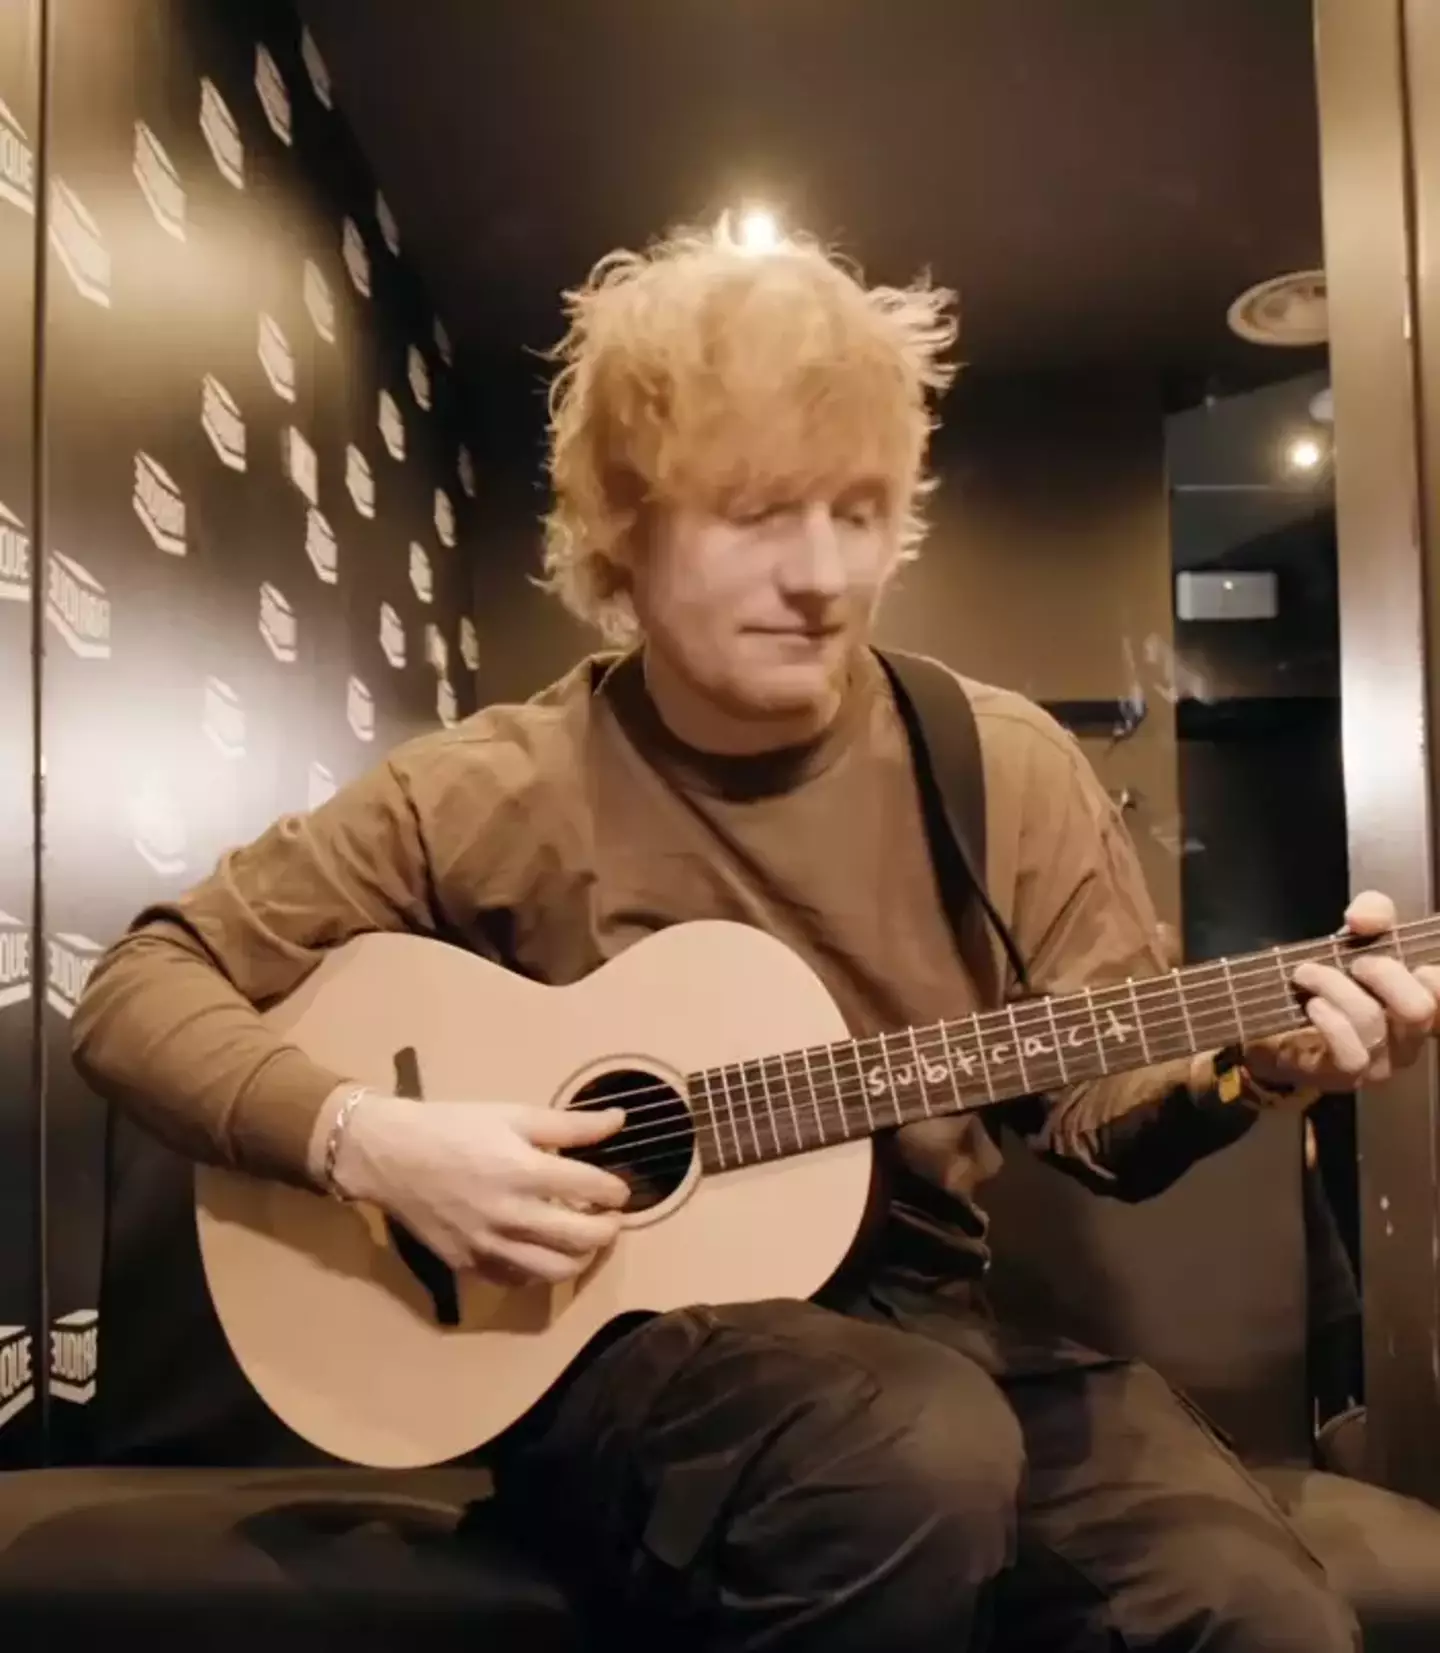 Sheeran showed the jury how he commonly uses mashups to 'spice it up a bit' at live concerts.